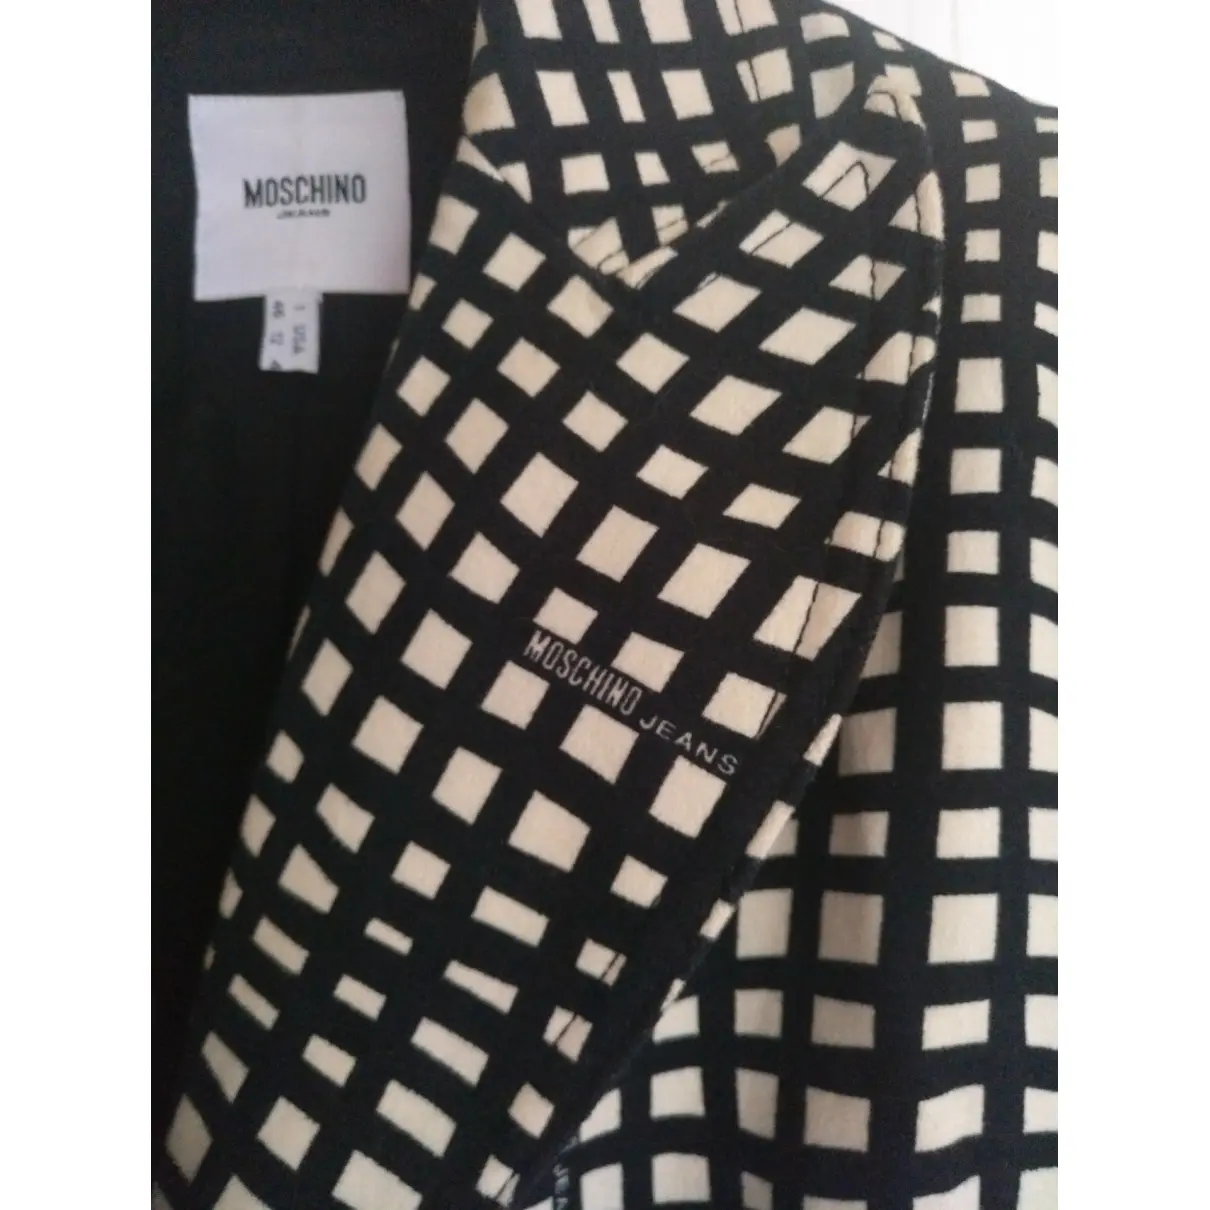 Moschino Cheap And Chic Wool blazer for sale